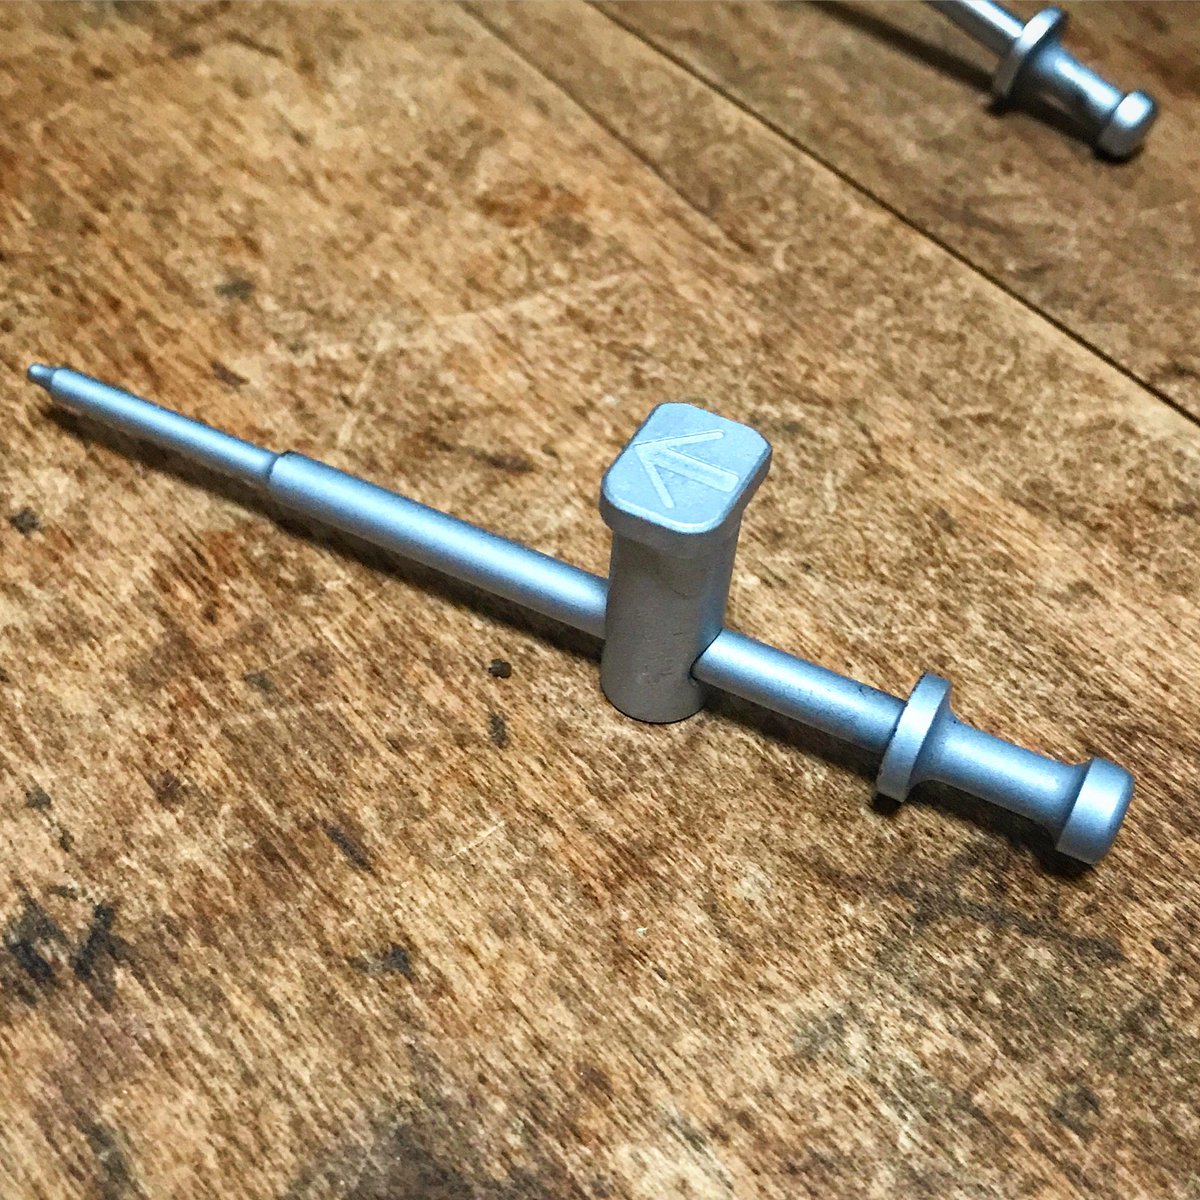 Precision Cam Pin and Titanium Firing Pin - go together like peas and carrots. - Forrest Gump leitner-wise.com